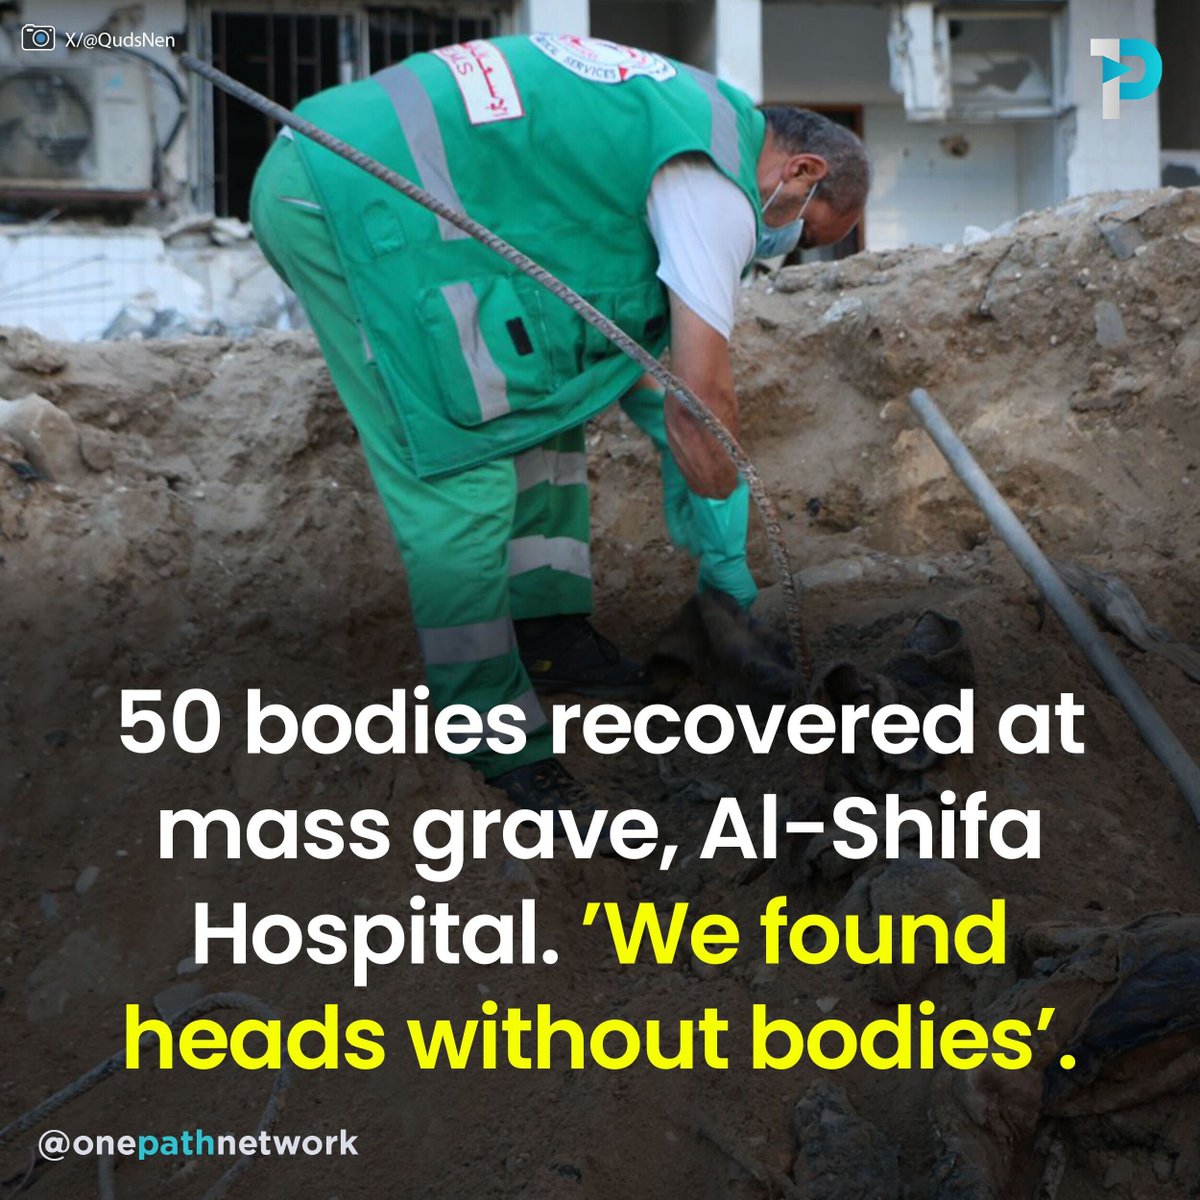 🚨🇵🇸 Another mass grave has been found at Gaza’s al-Shifa Hospital 😔 Yielding 50 bodies so far, as stated by Gaza’s government media office. In total, seven mass graves have been found in Gaza during the war, containing a combined total of 520 bodies.